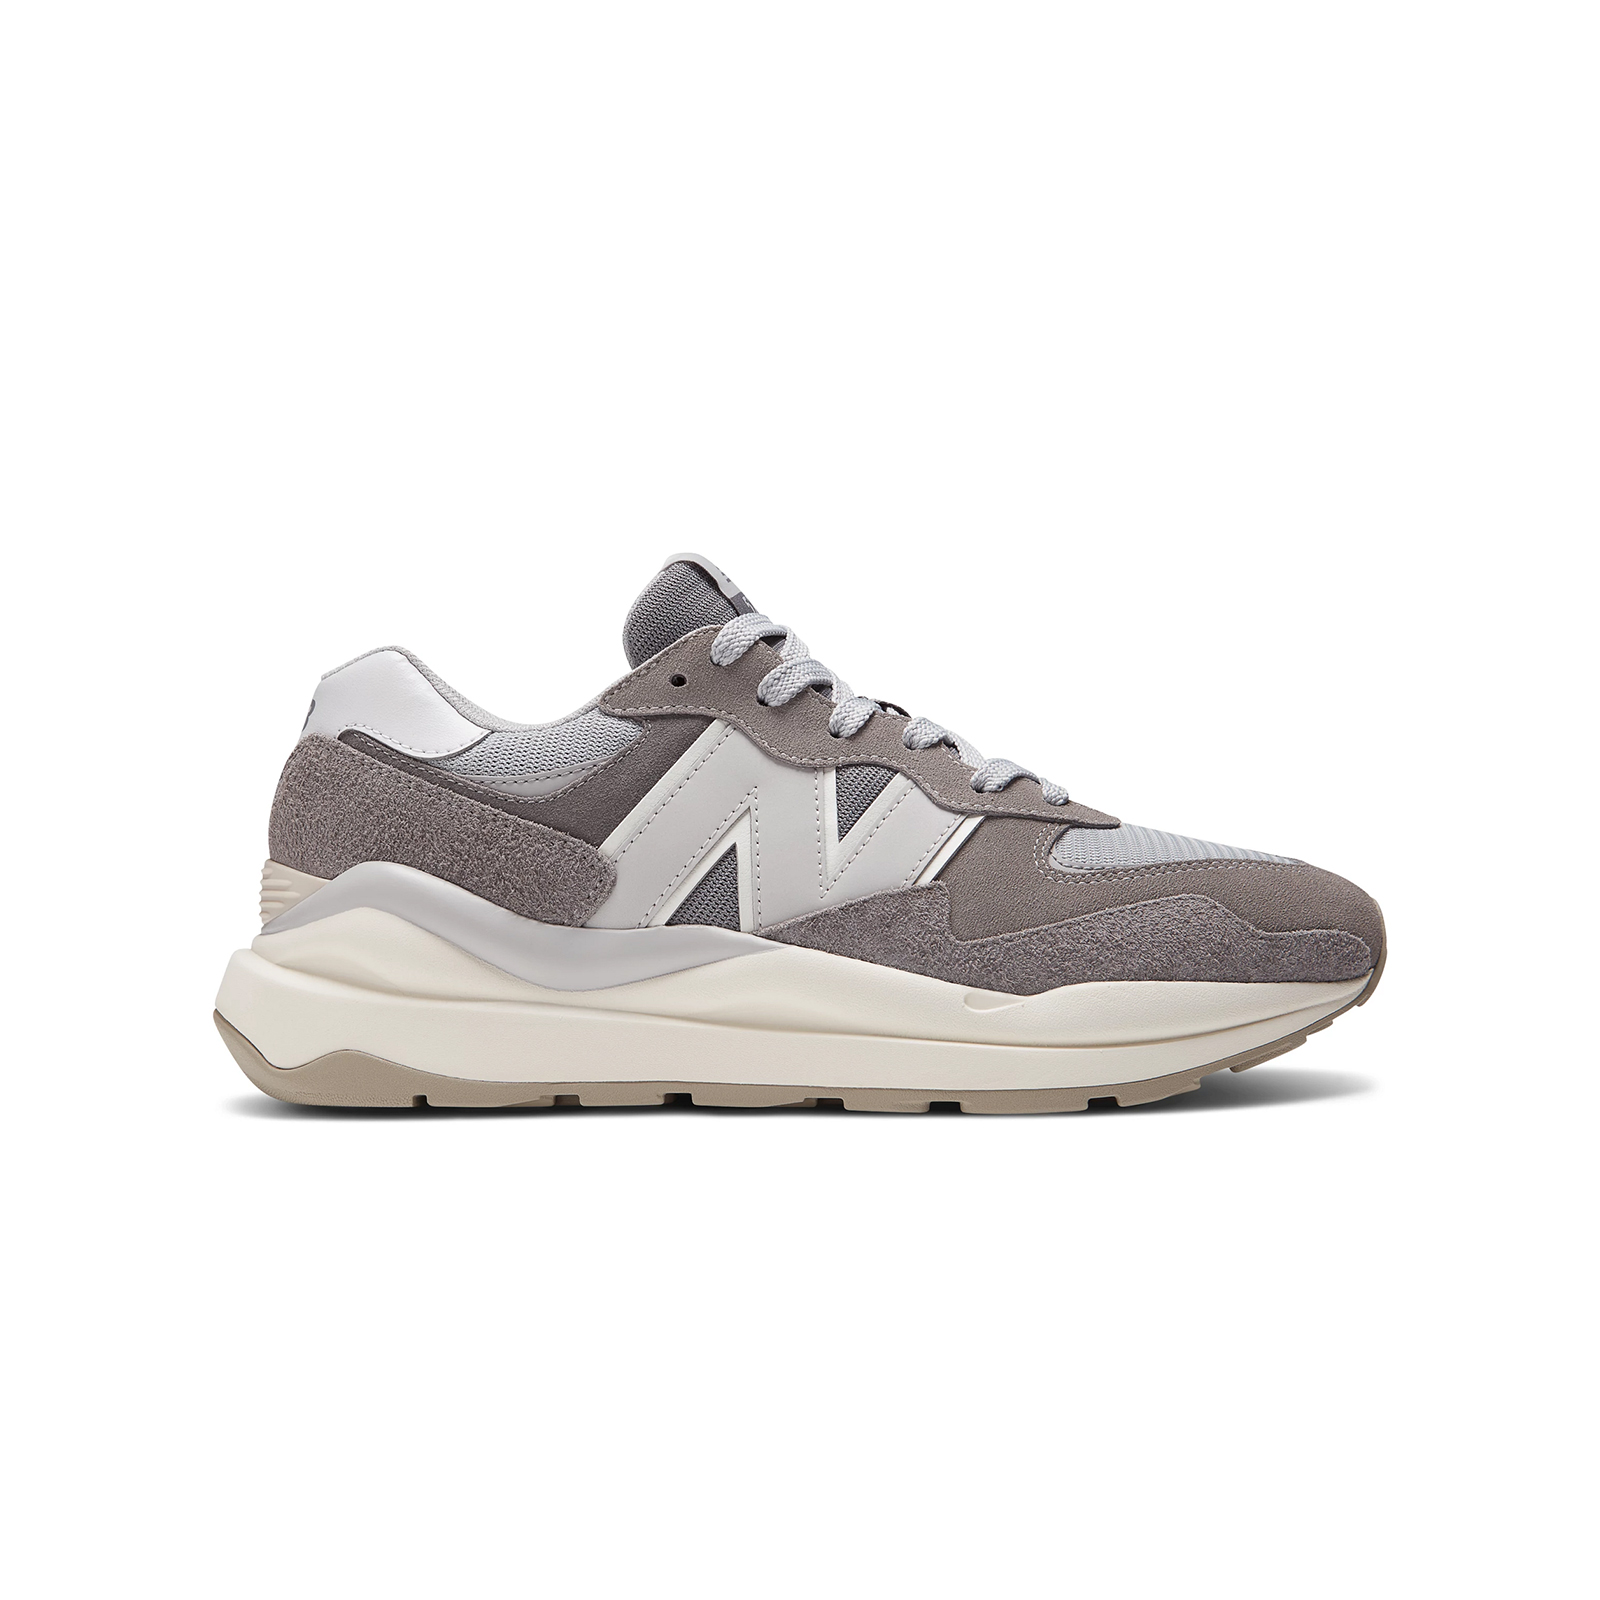 New balance ls - SHOES CLASSIC RUNNING - MARBLEHEAD Ανδρικά > Παπούτσια > Sneaker > Παπούτσι Low Cut